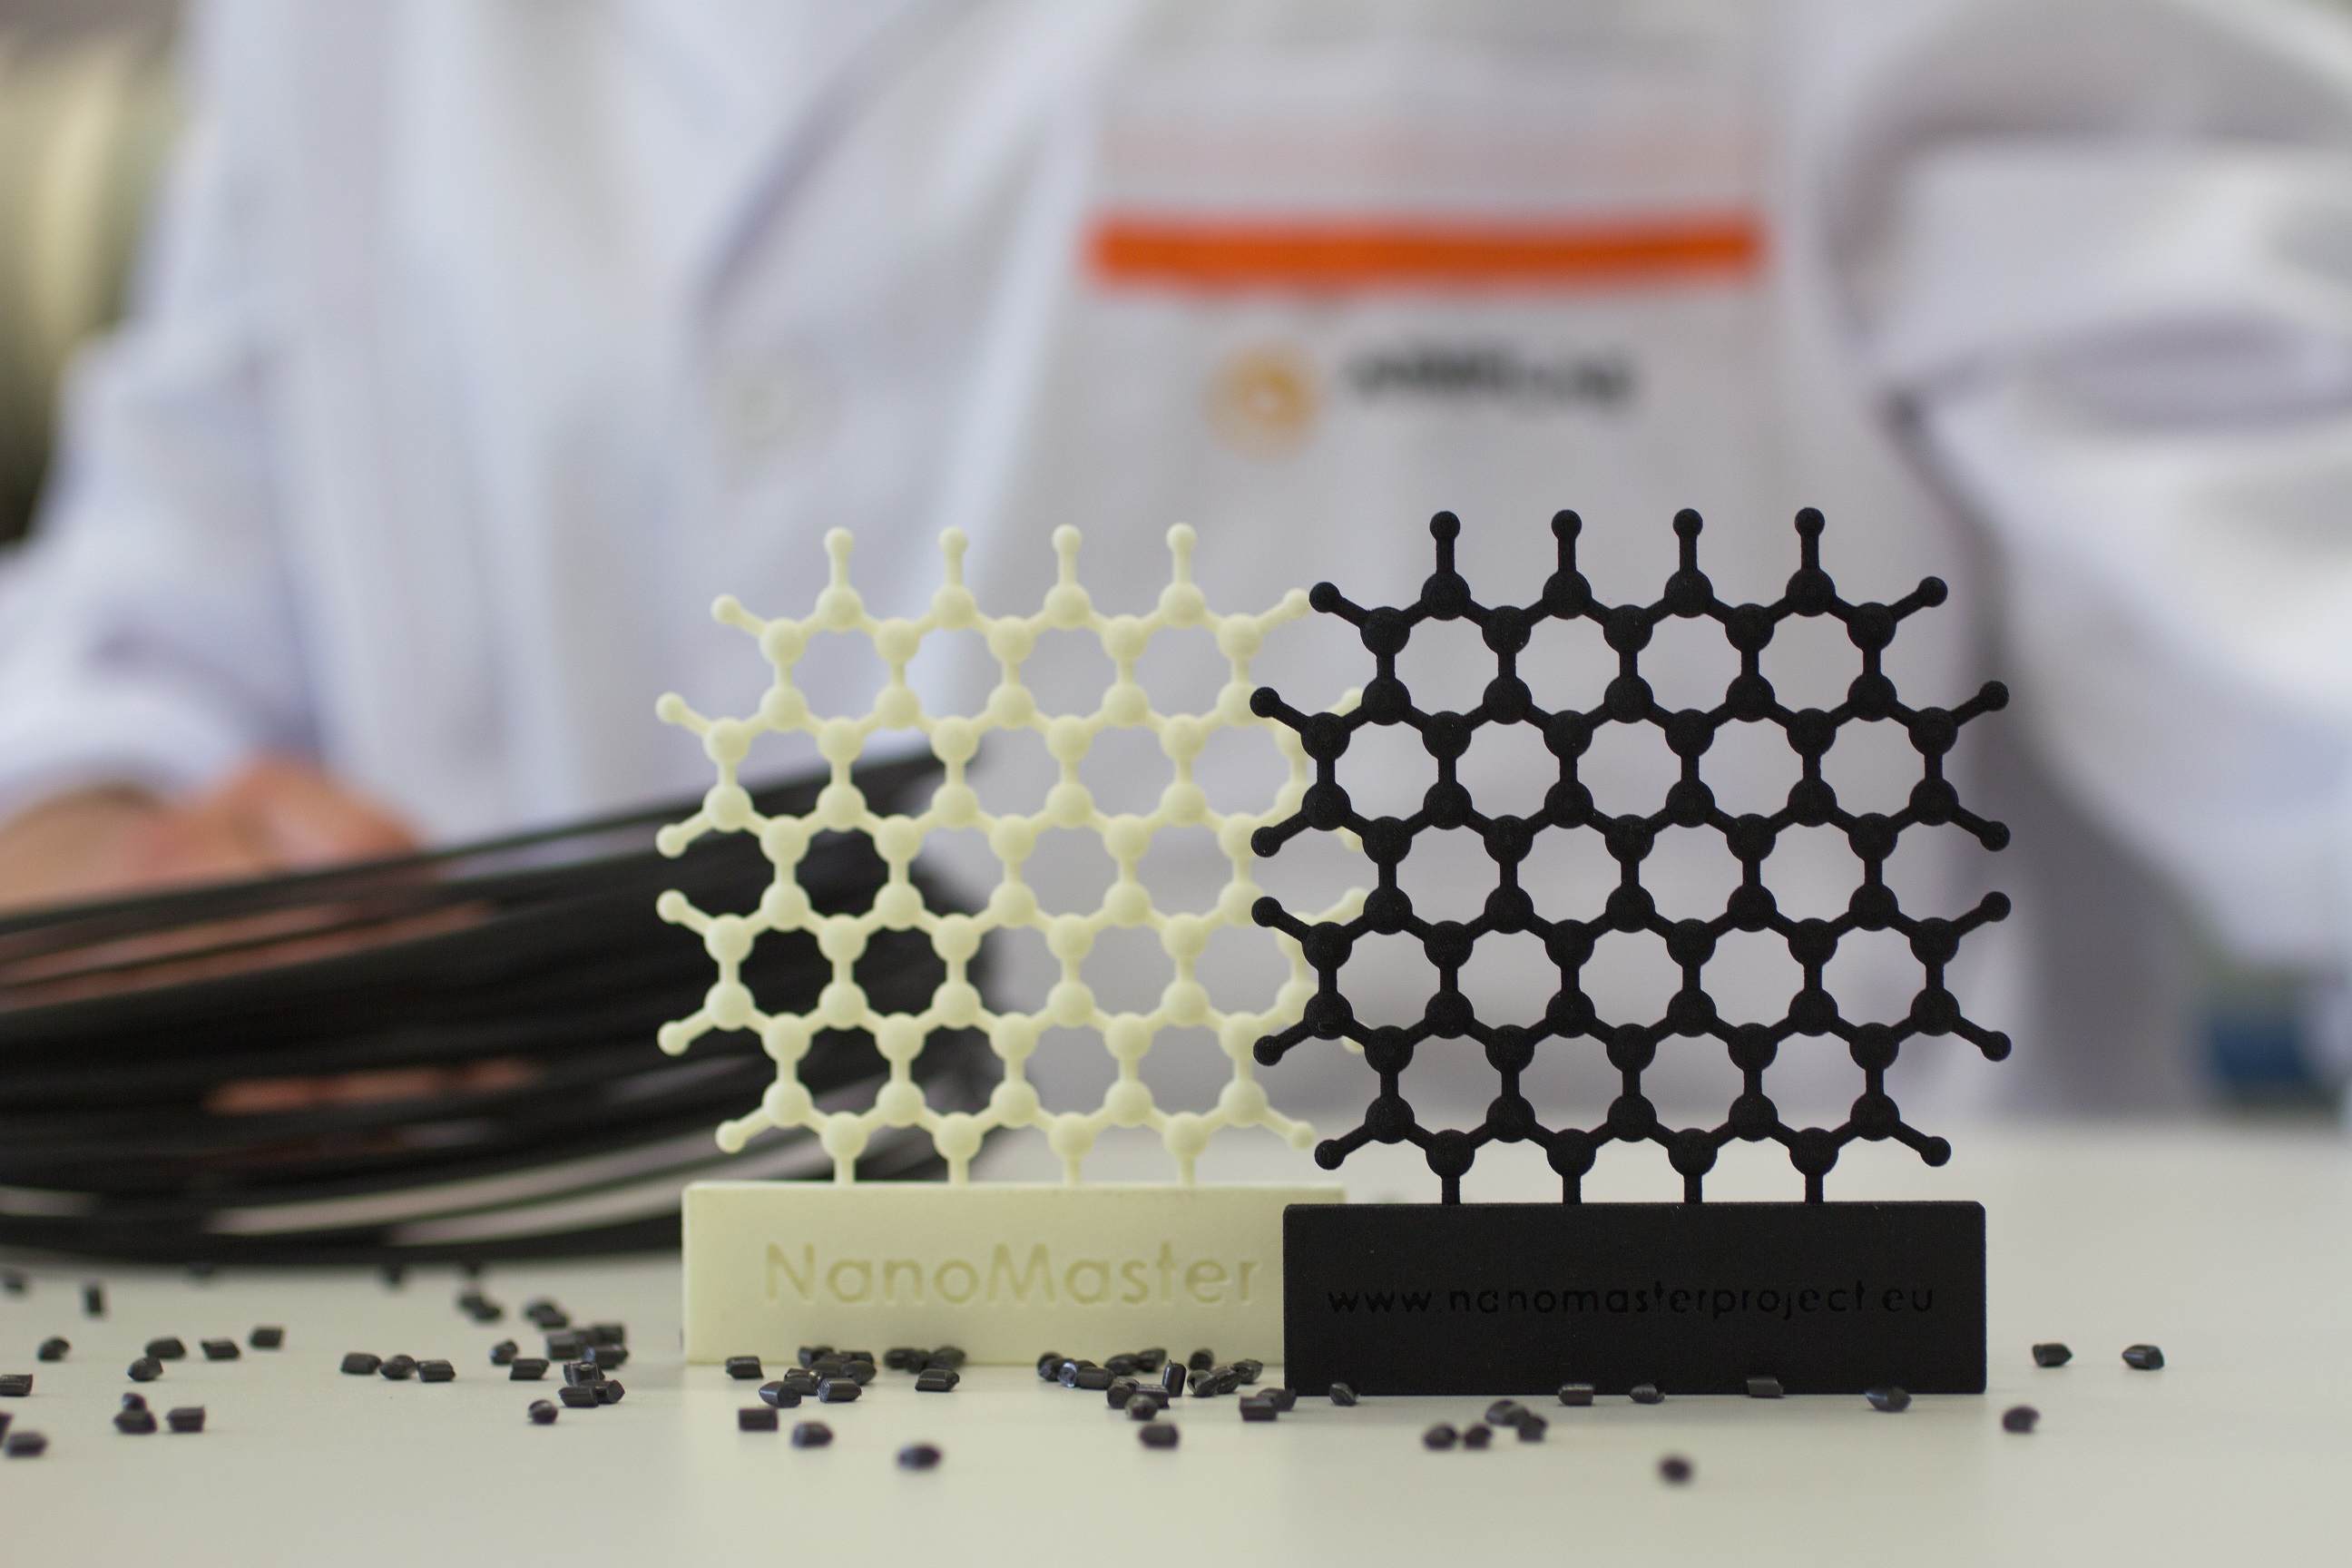 One of AIMPLAS’ tasks has been to develop graphene nanocompounds and masterbatches to be used in injection, extrusion and AM processes.